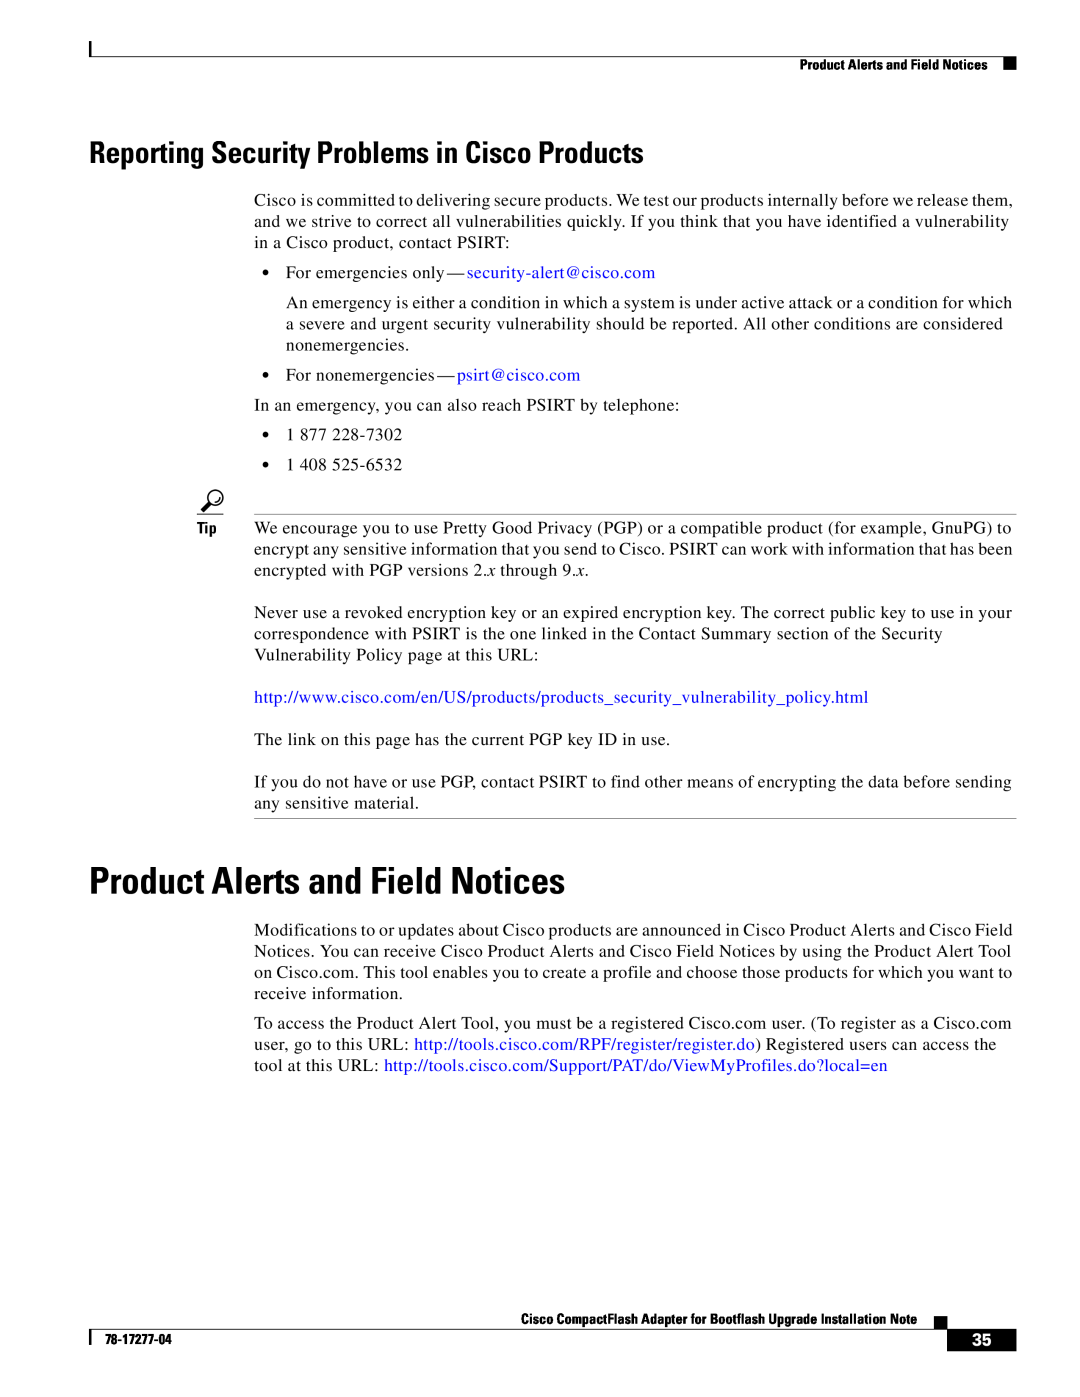 Cisco Systems CompactFlash Adapter manual Product Alerts and Field Notices, Reporting Security Problems in Cisco Products 